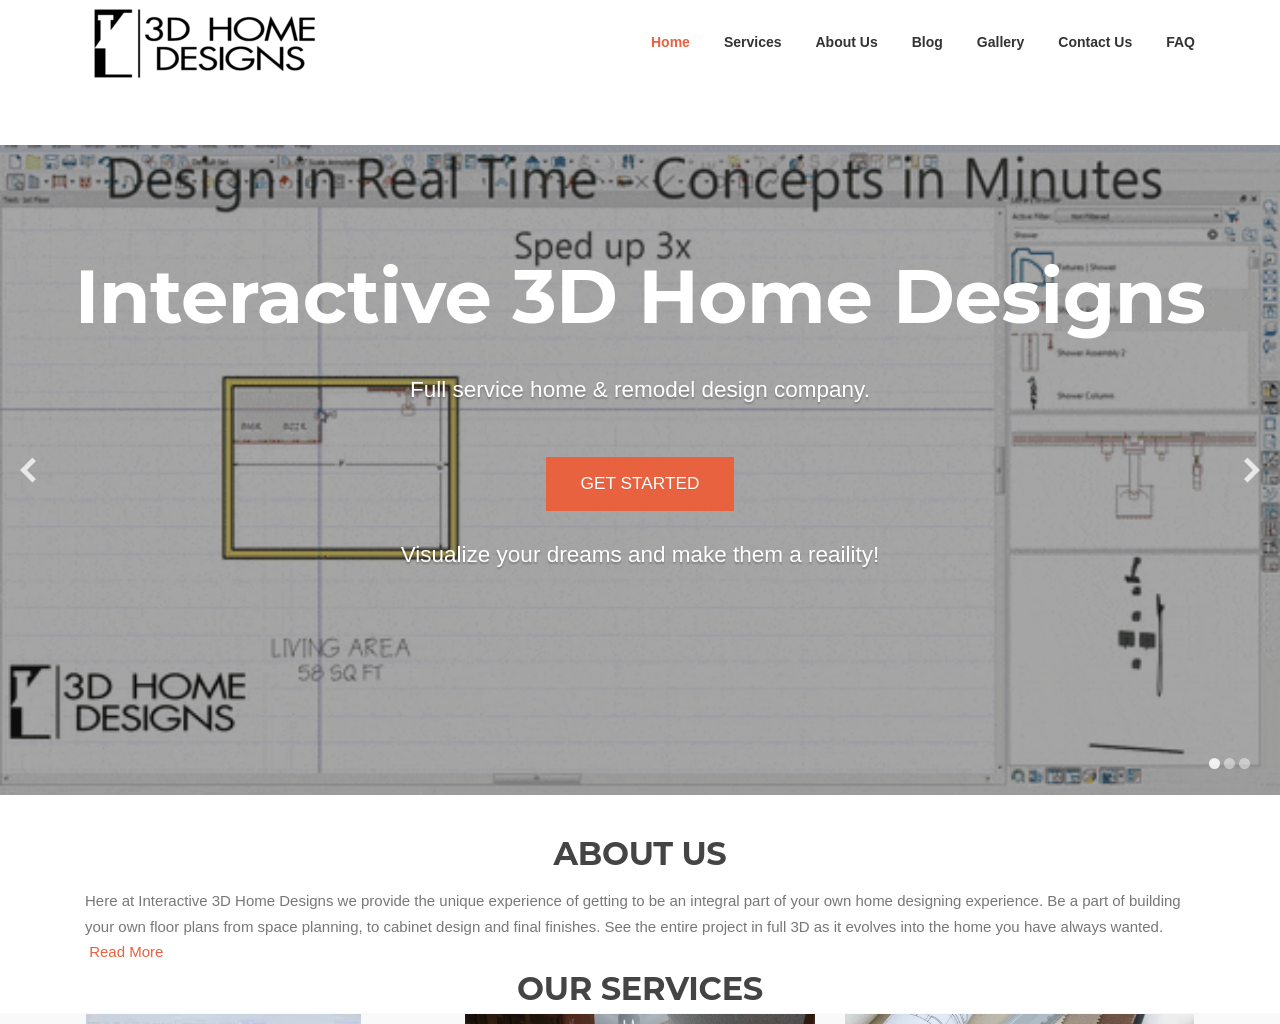 3dhomedesigns.com